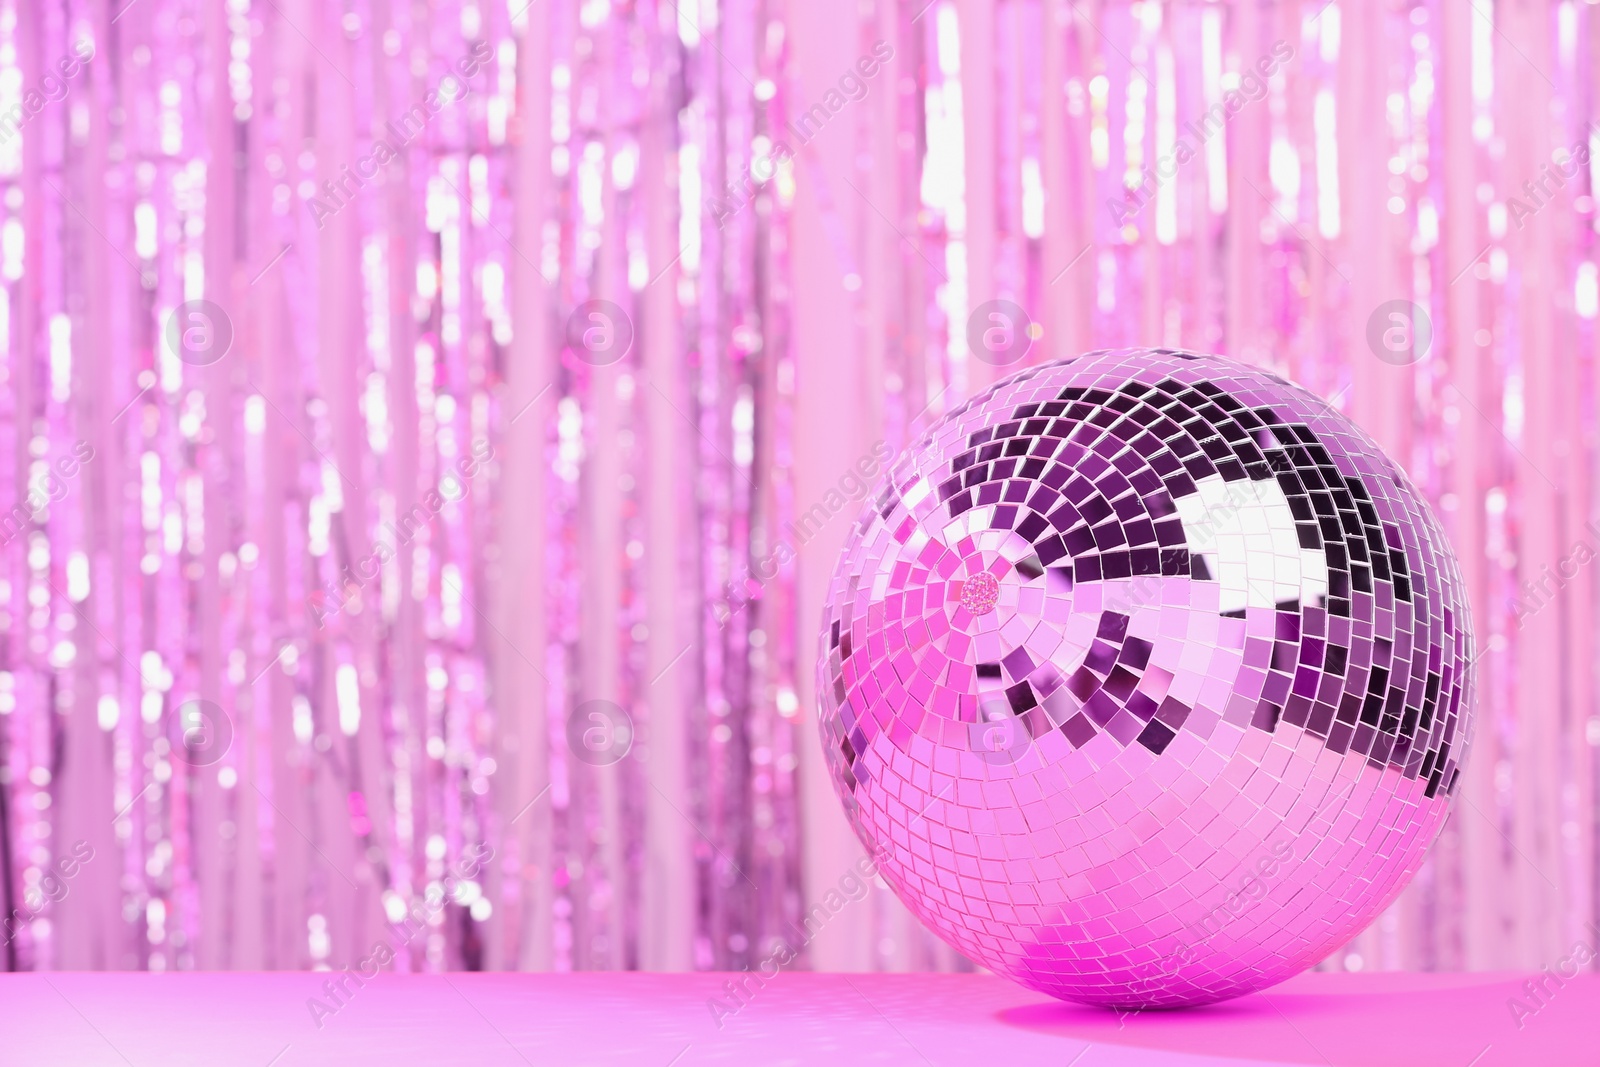 Photo of Shiny disco ball on table against blurred background, toned in pink. Space for text